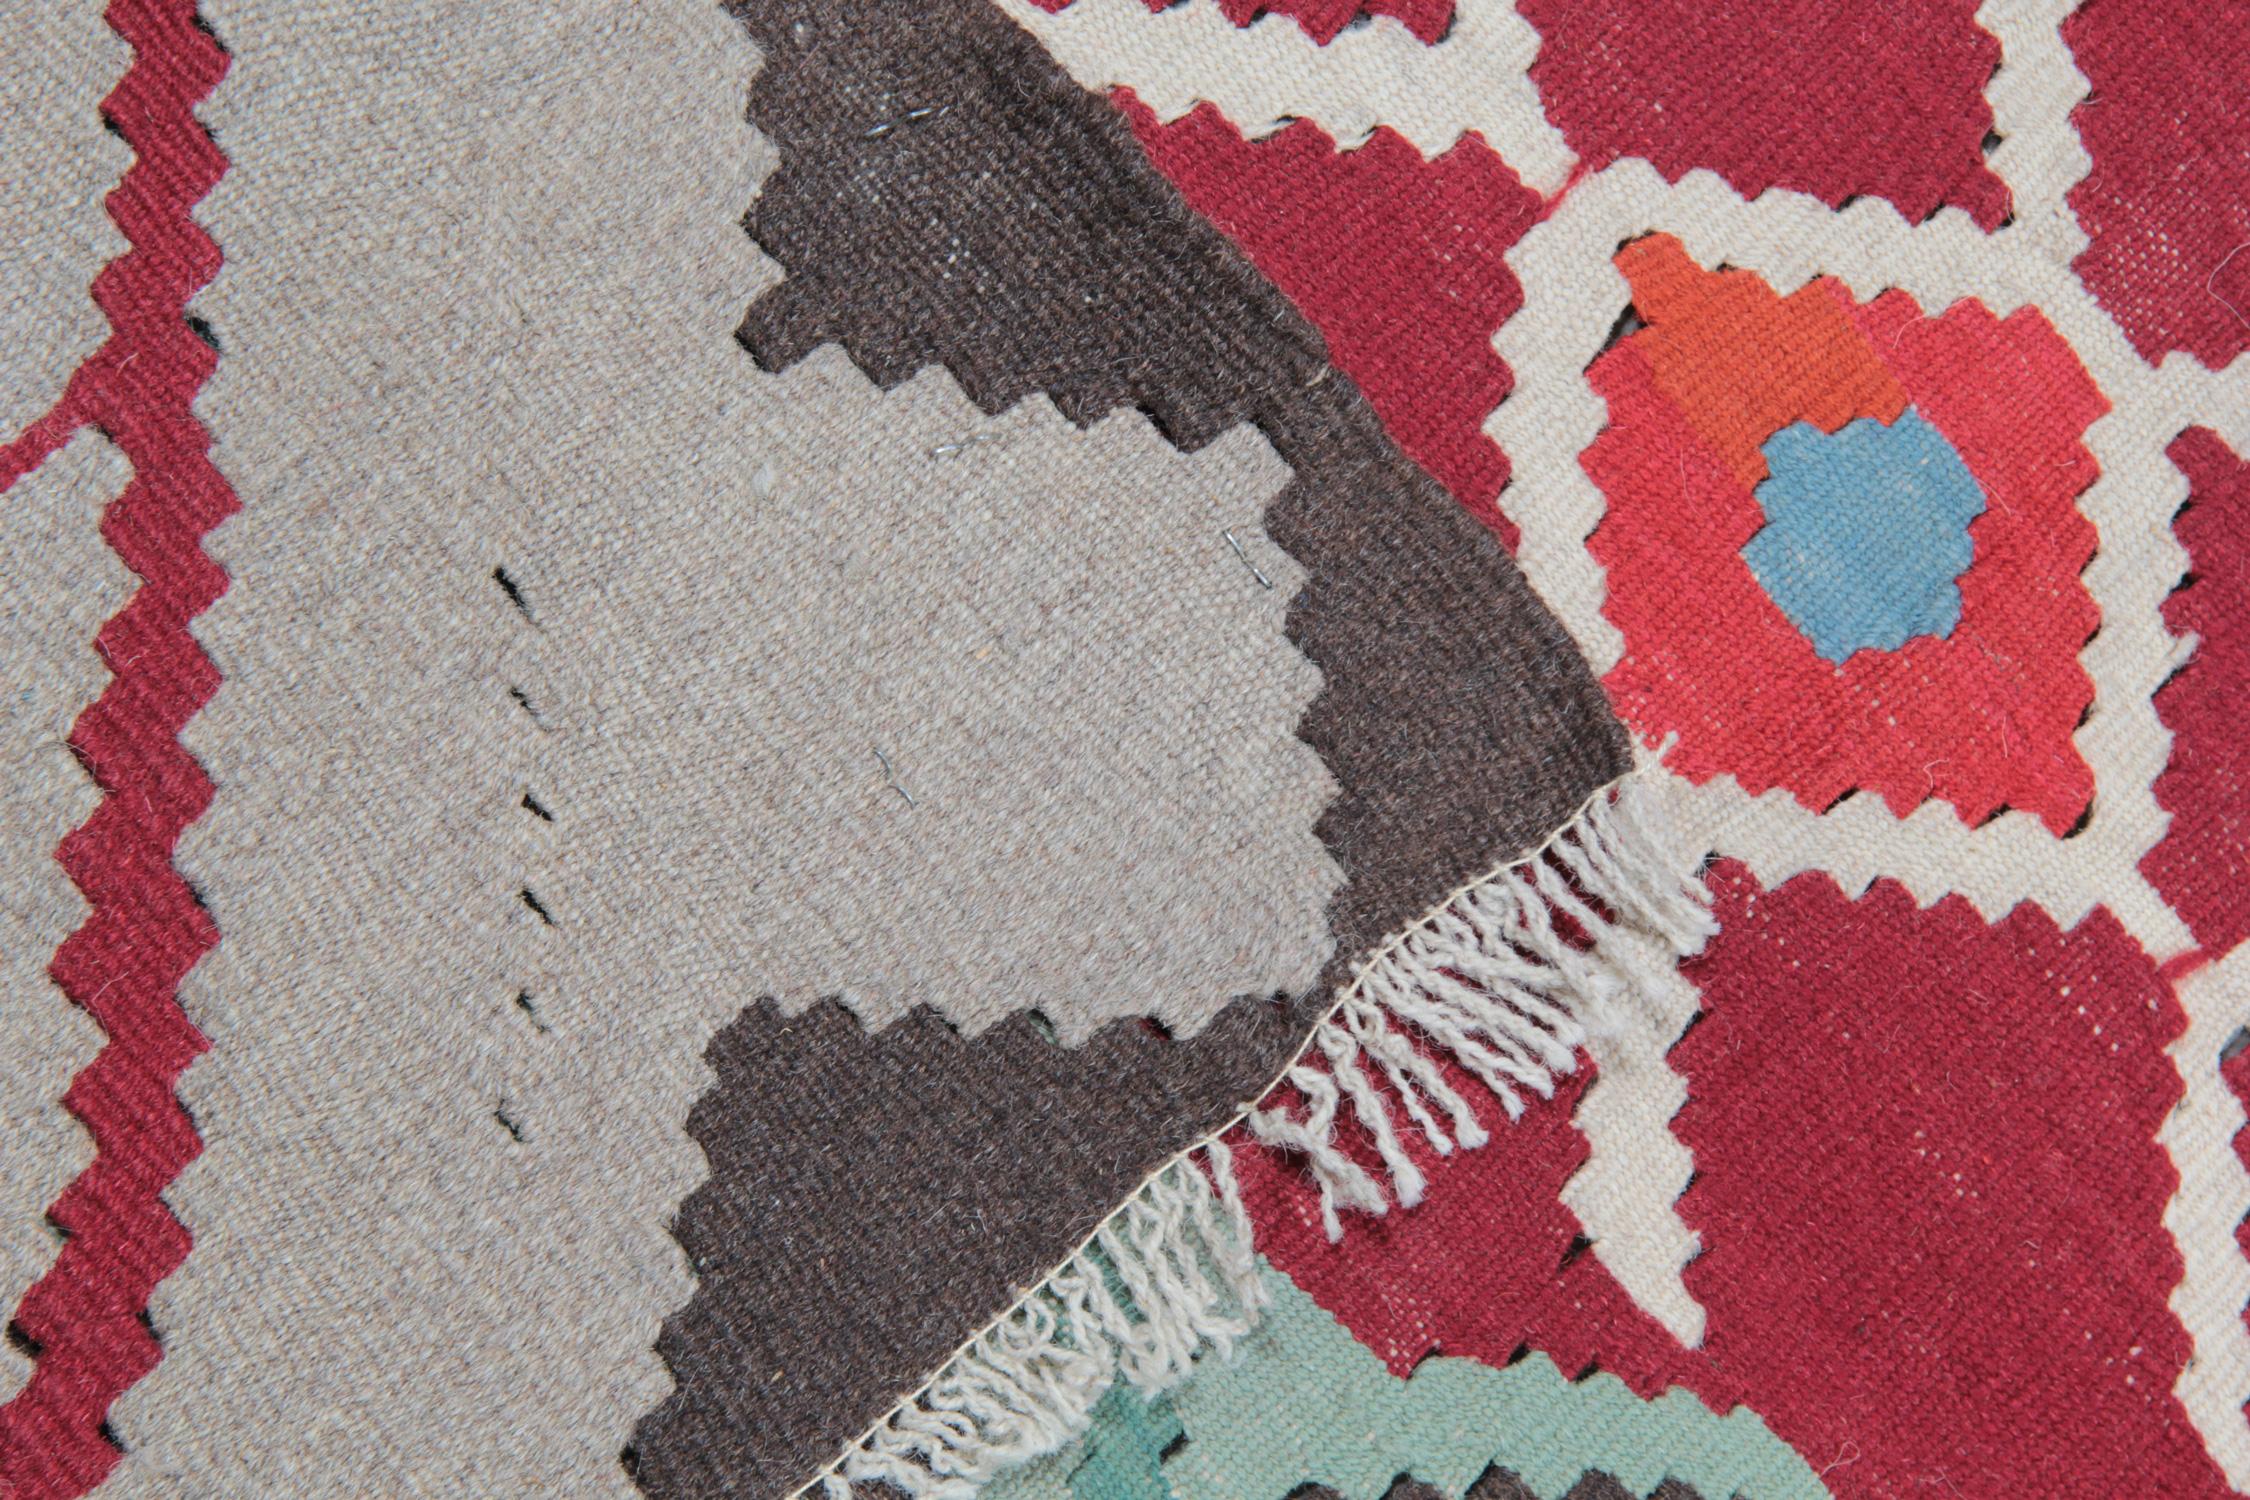 Cotton Antique Kilim Rugs, Handwoven Traditional Rugs, Carpet from Karabagh